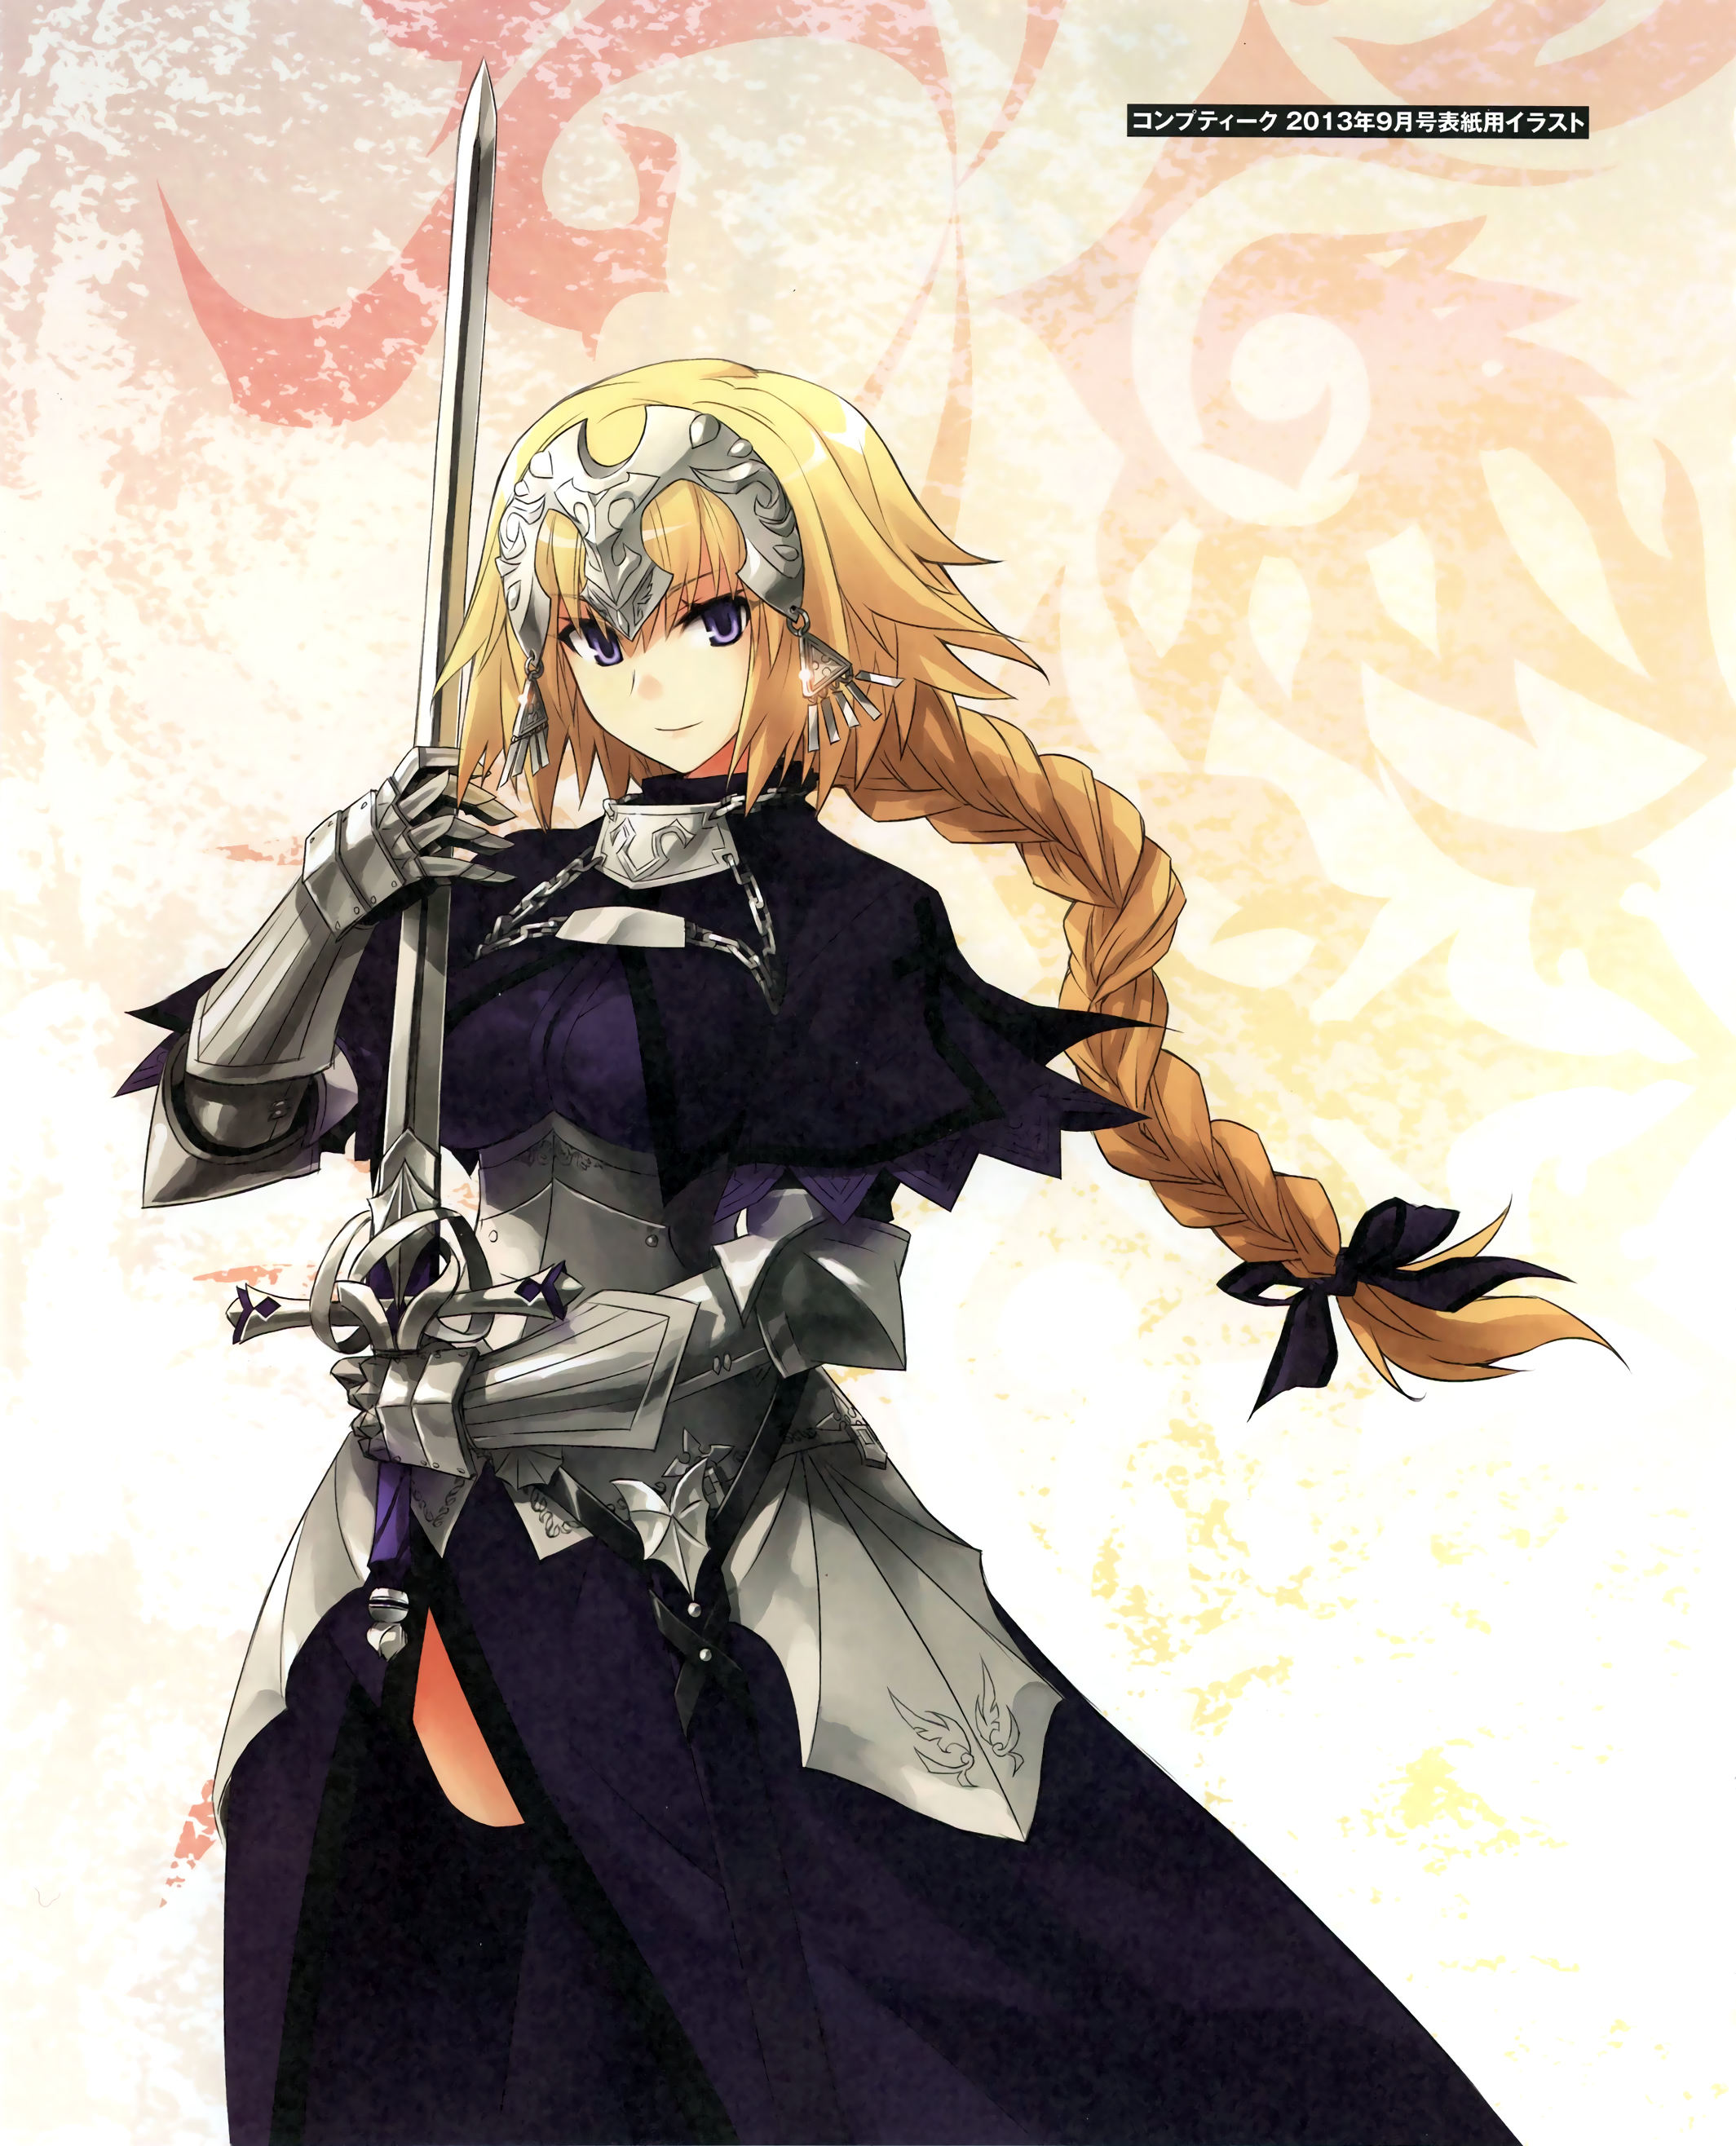 Amazing Fate Apocrypha Pictures & Backgrounds